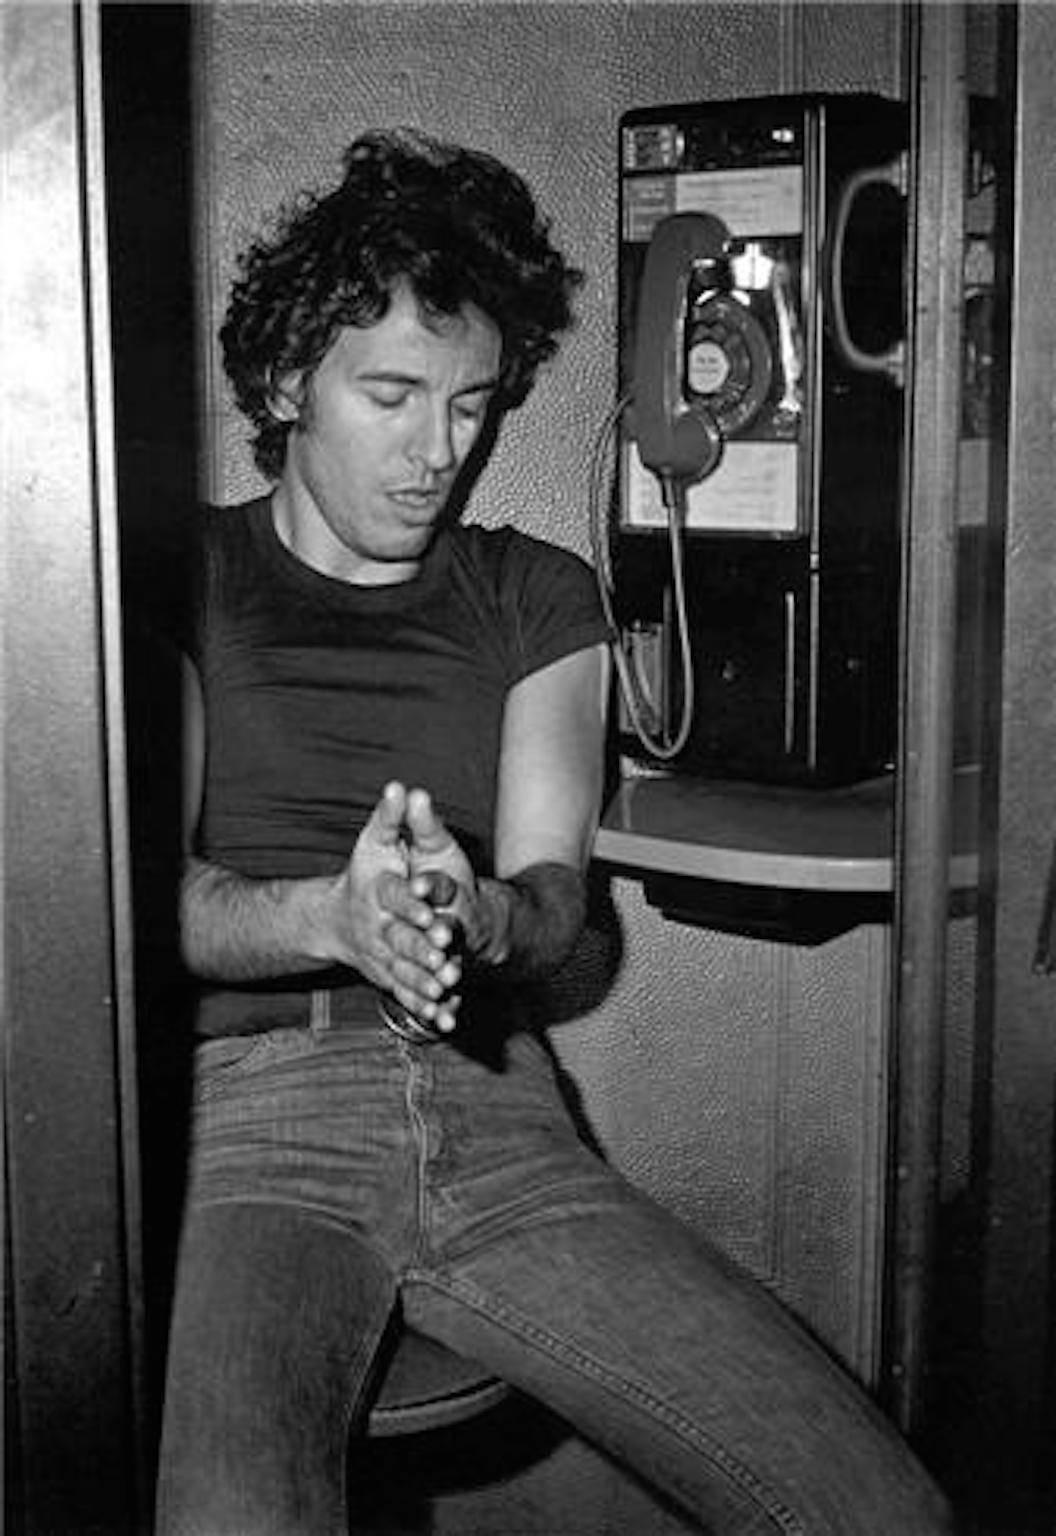 Bruce Springsteen, "The Call, " 1978 - Photograph by Frank Stefanko